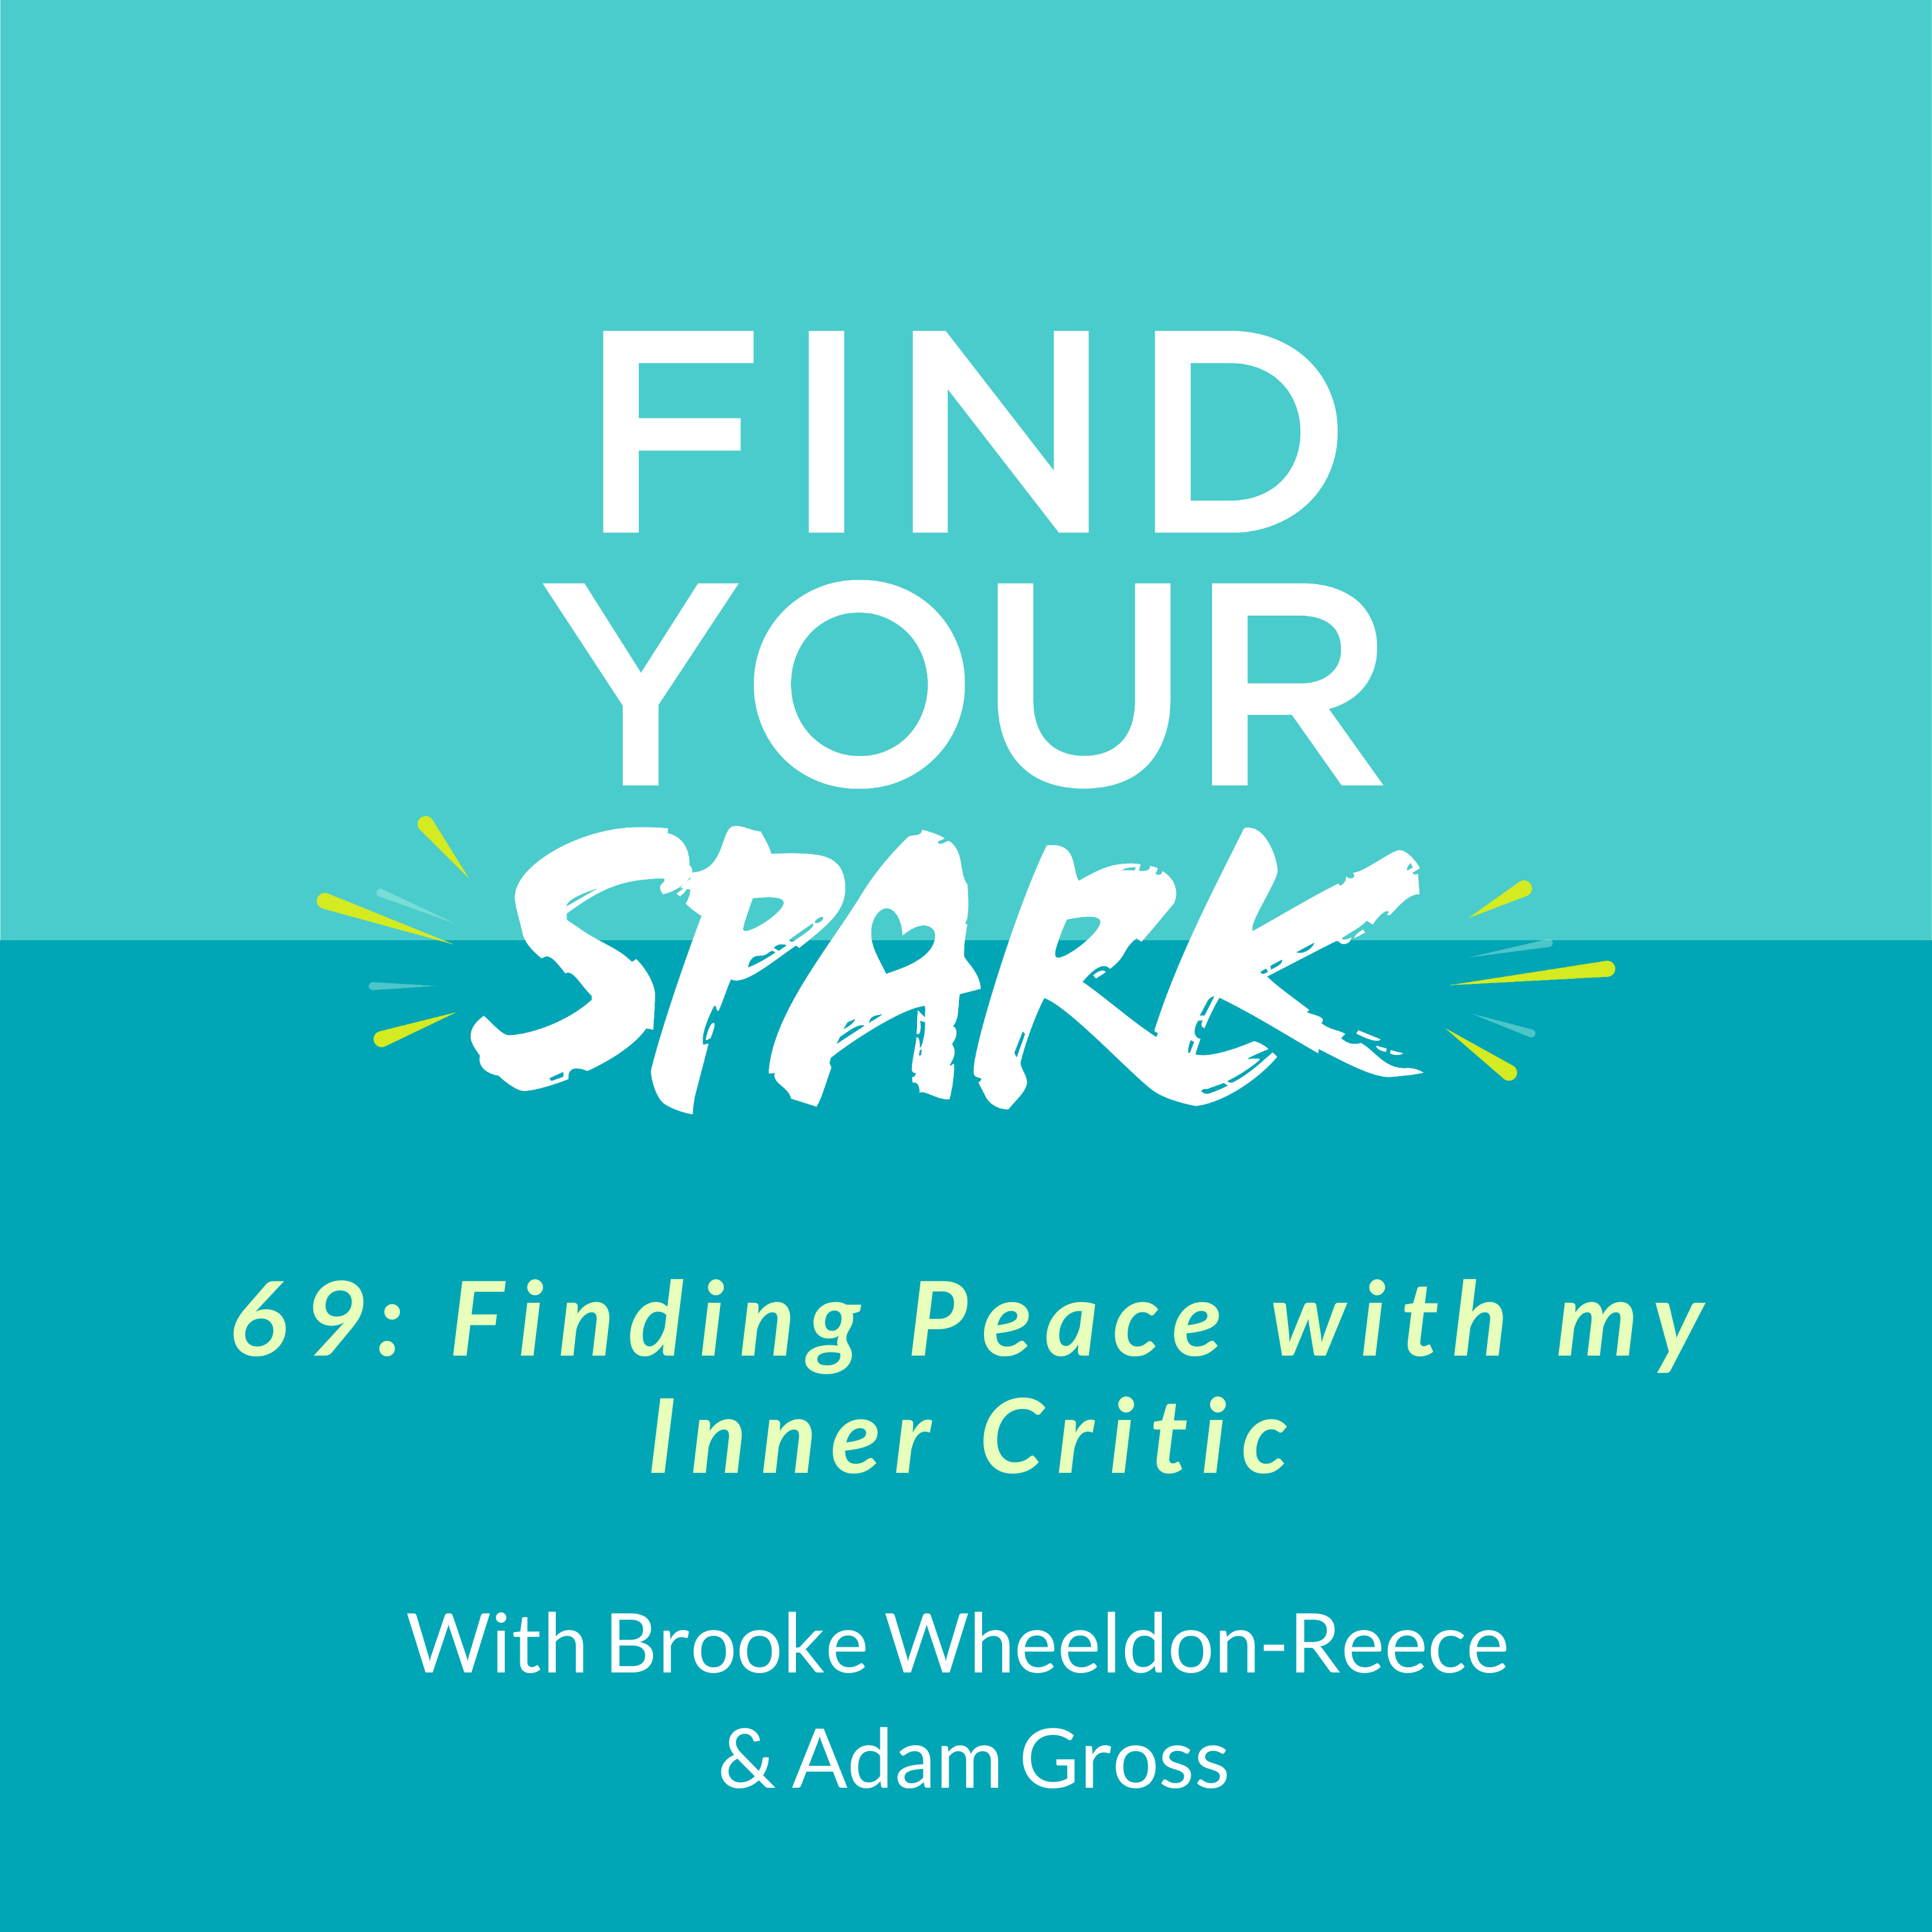 69: Finding Peace with my Inner Critic